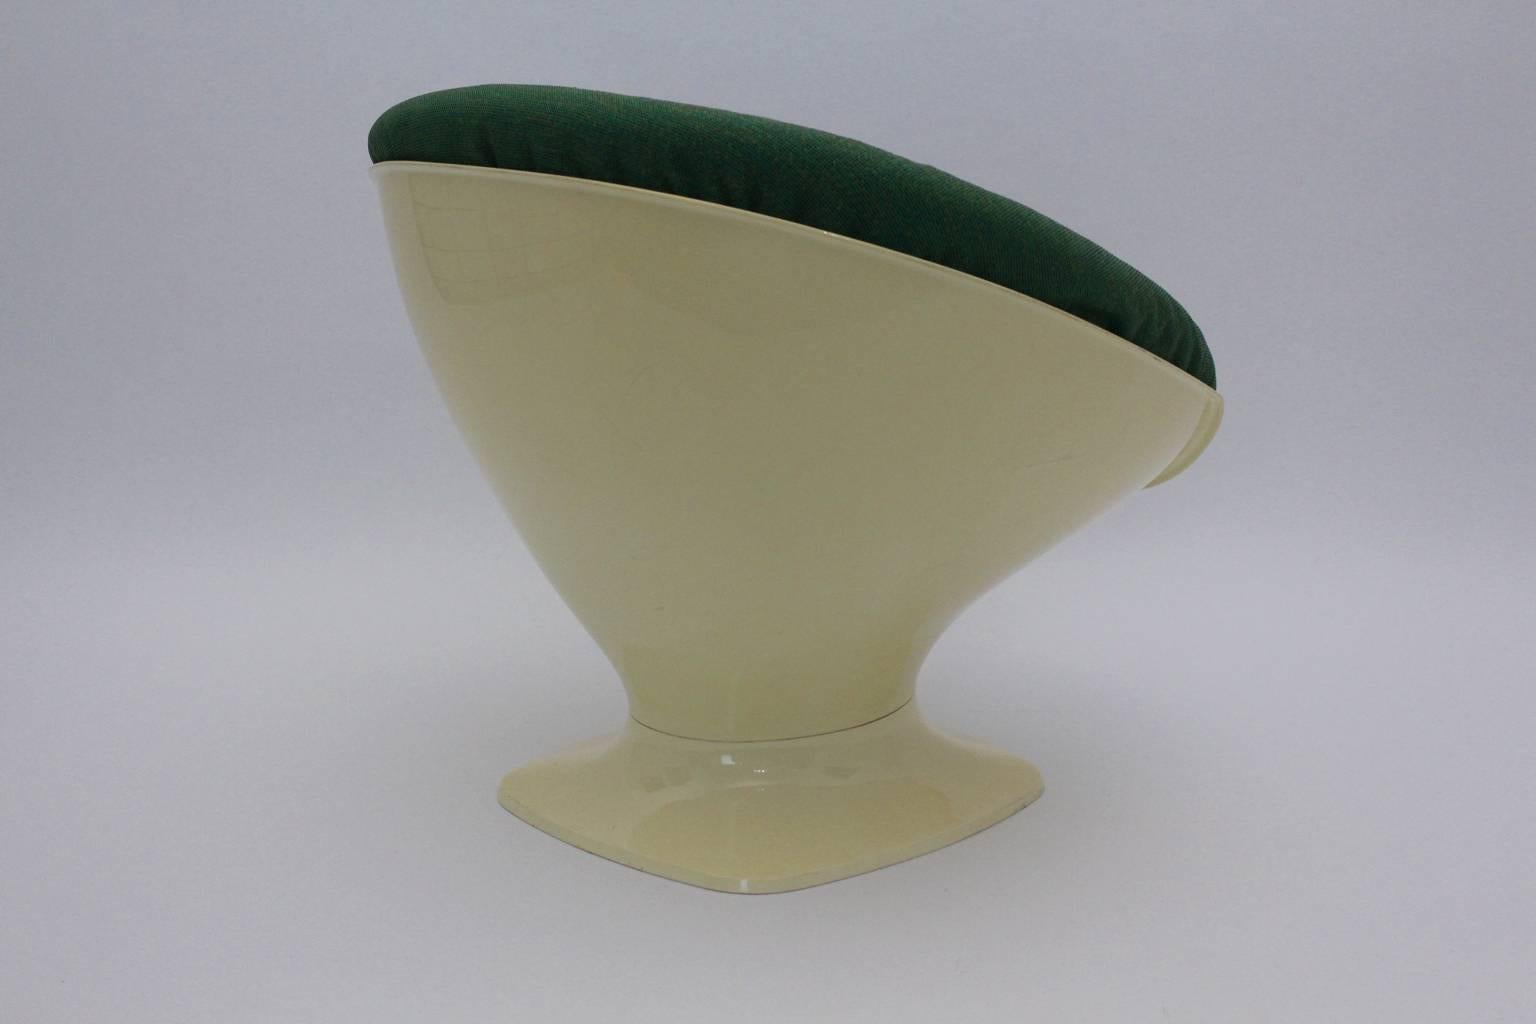 Mid-Century Modern Mid Century Modern Green Ivory Space Age VIntage Plastic Club Chair Rafael 1970s For Sale